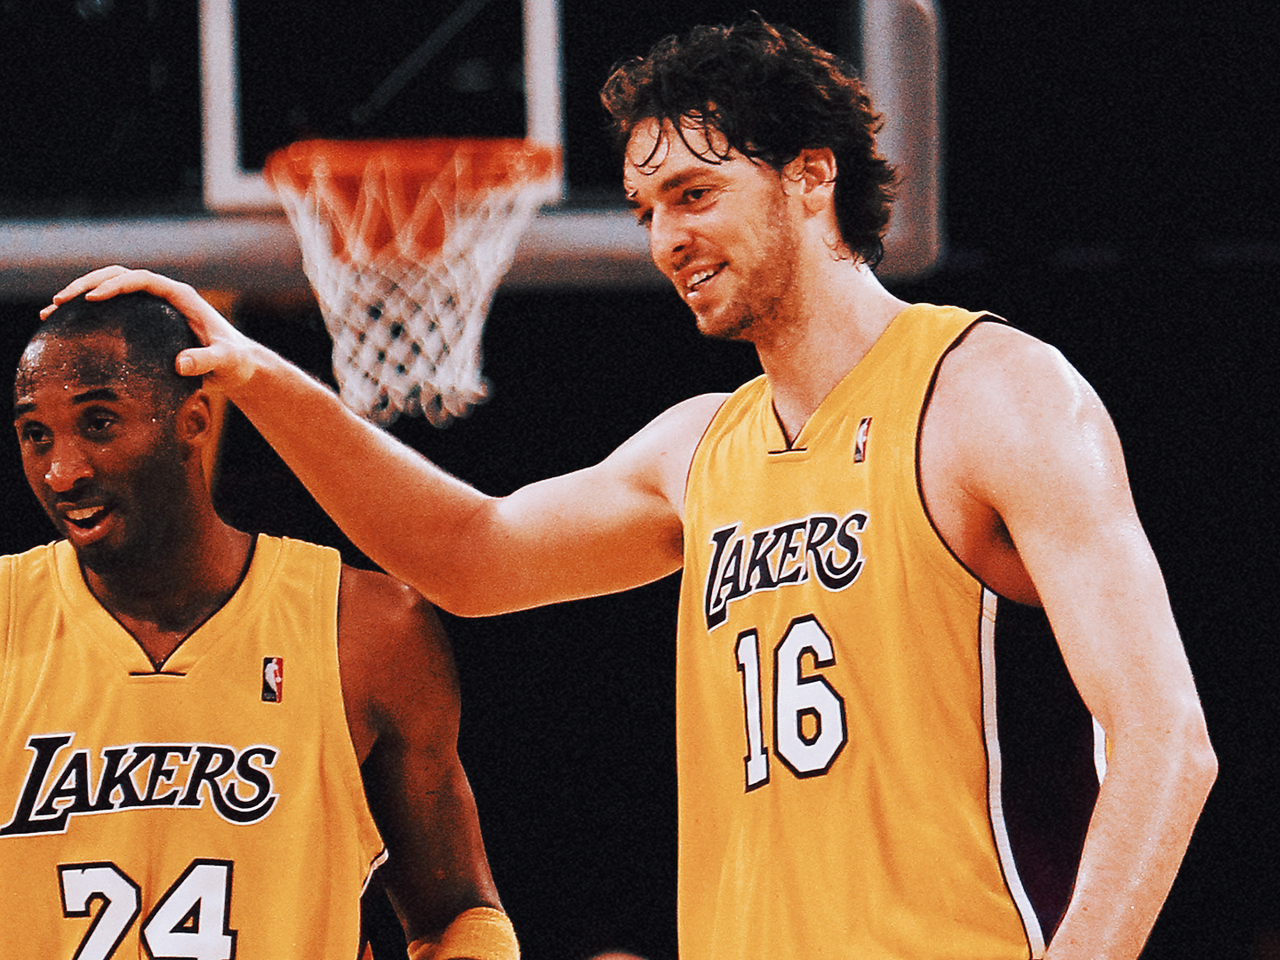 Only Top Players Could Do What He Did at That Moment”: Pau Gasol